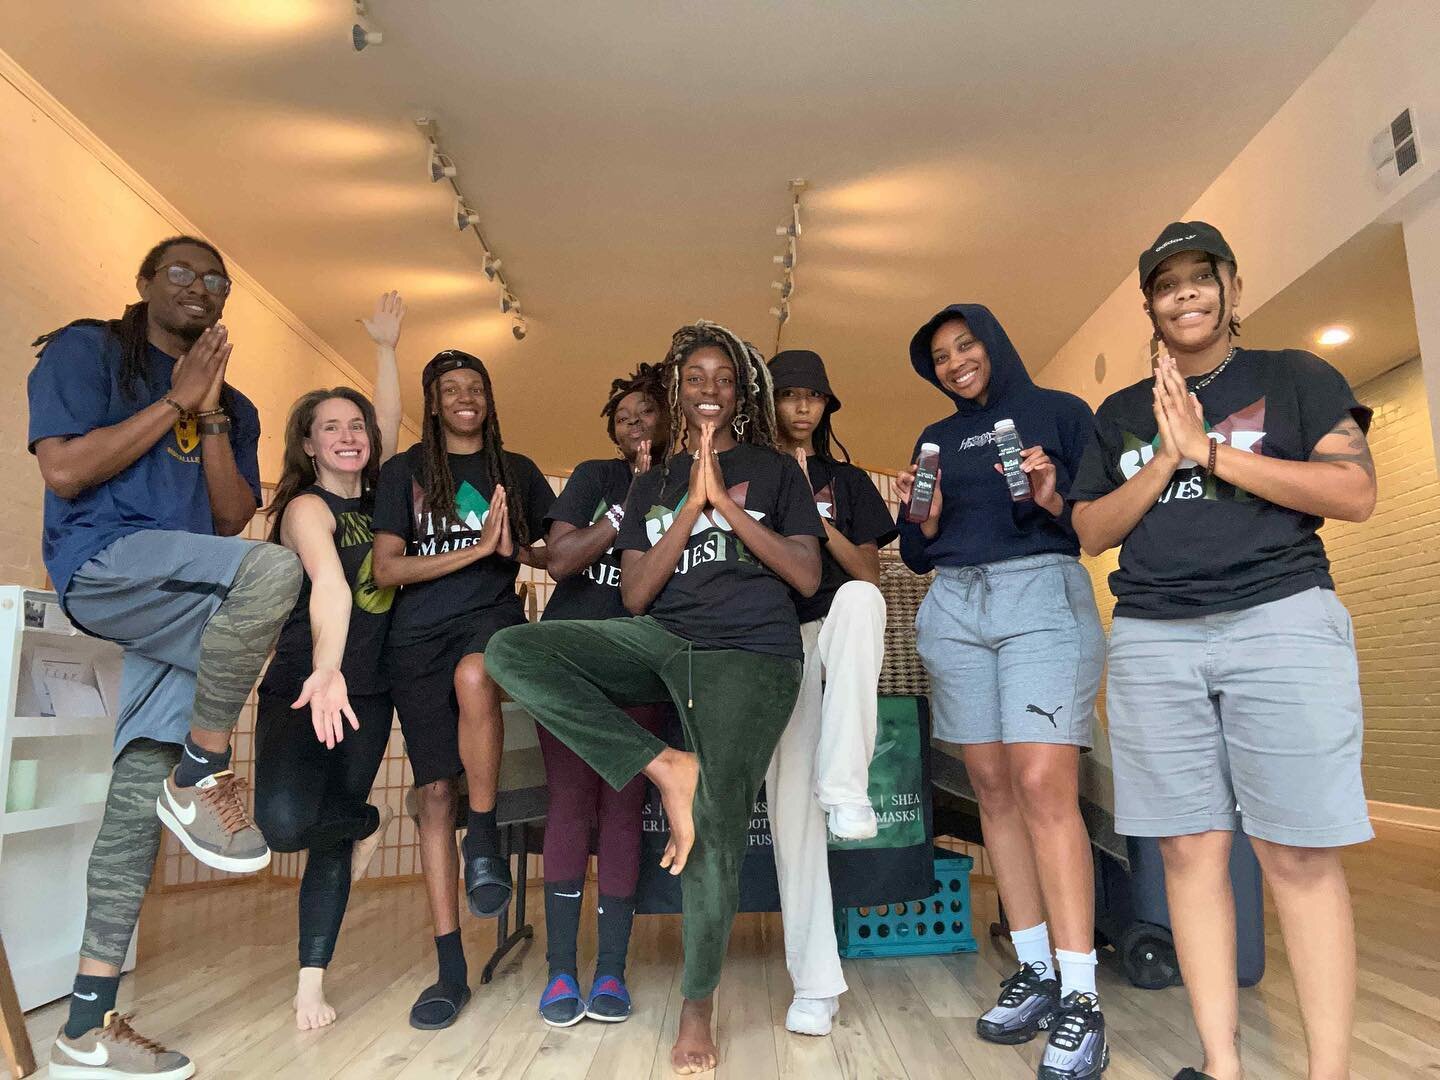 Had a blast with the @blackmajestea crew last weekend! We kicked off the first Yoga &amp; Tea Time workshop where we practiced an hour yoga and enjoyed custom tea blends! Afterwards, we open the floor for Q&amp;A about yoga, fitness, self defense, te